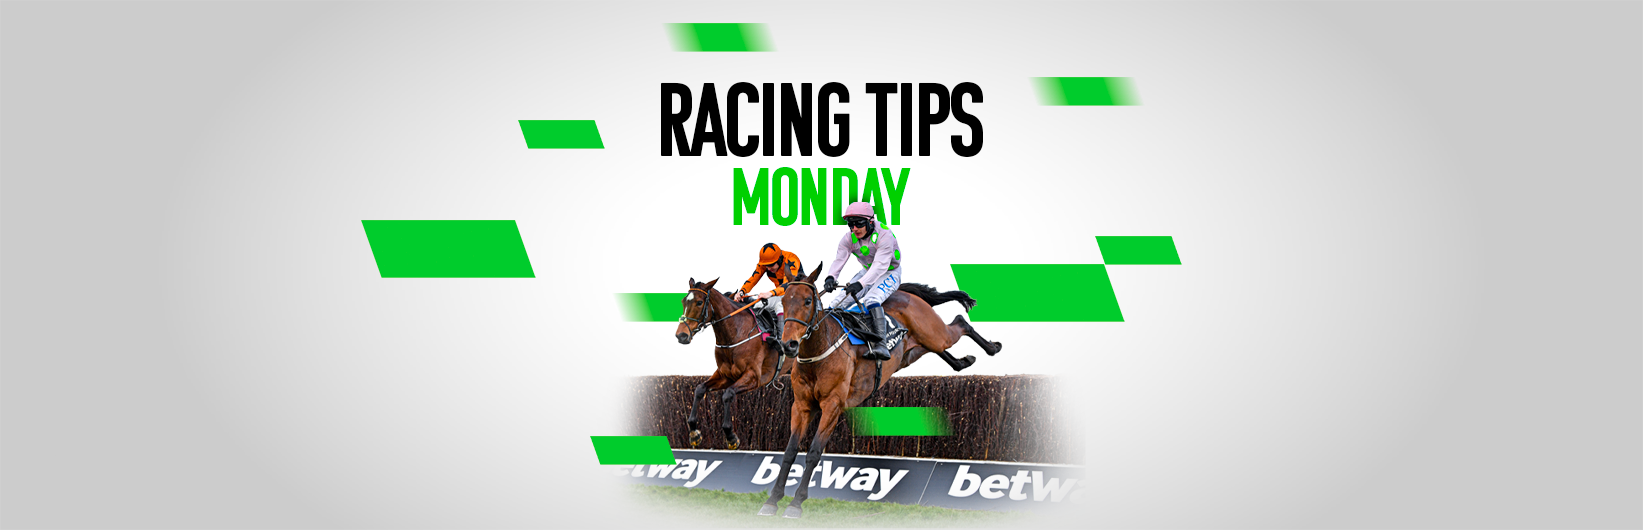 Monday racing tips: Monjules primed for return to action